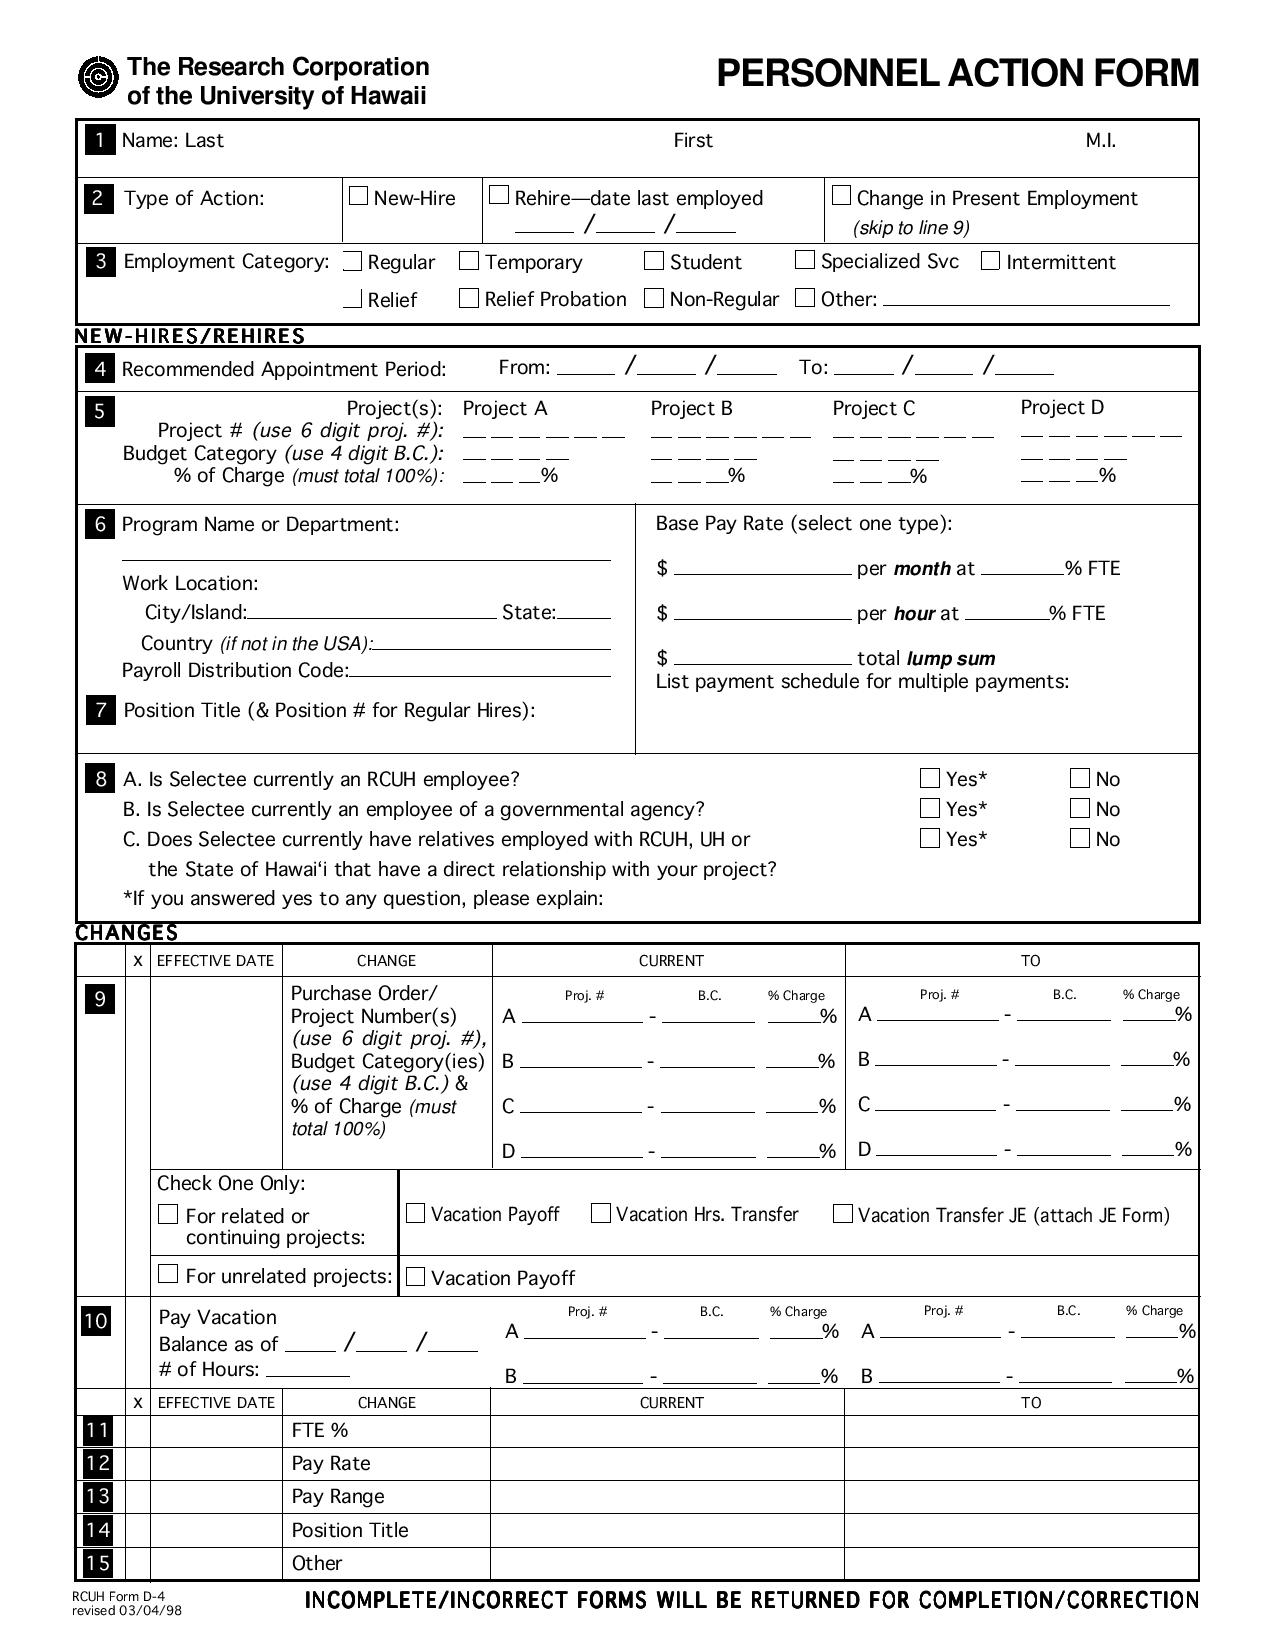 personnel action form for changes page 0011